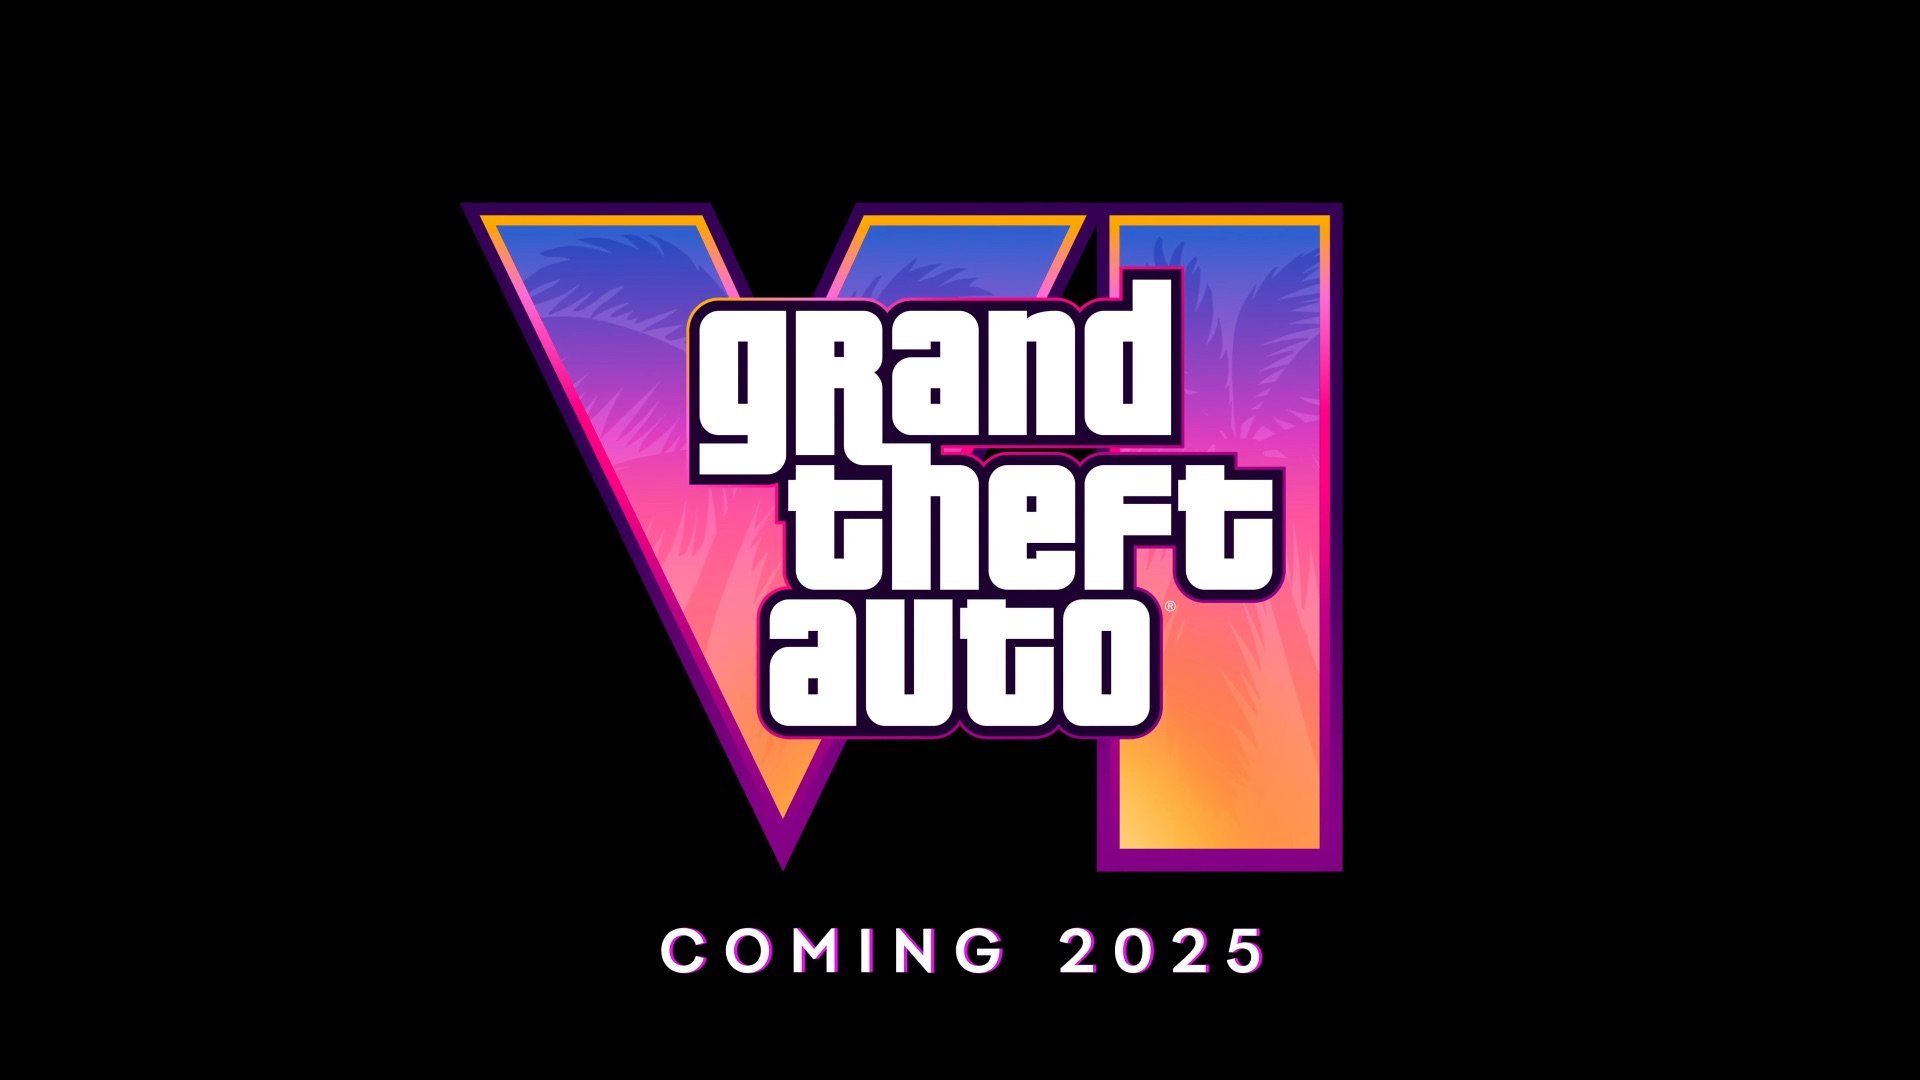 First GTA 6 trailer is now live! Coming in 2025 to PS5 and Xbox Series X